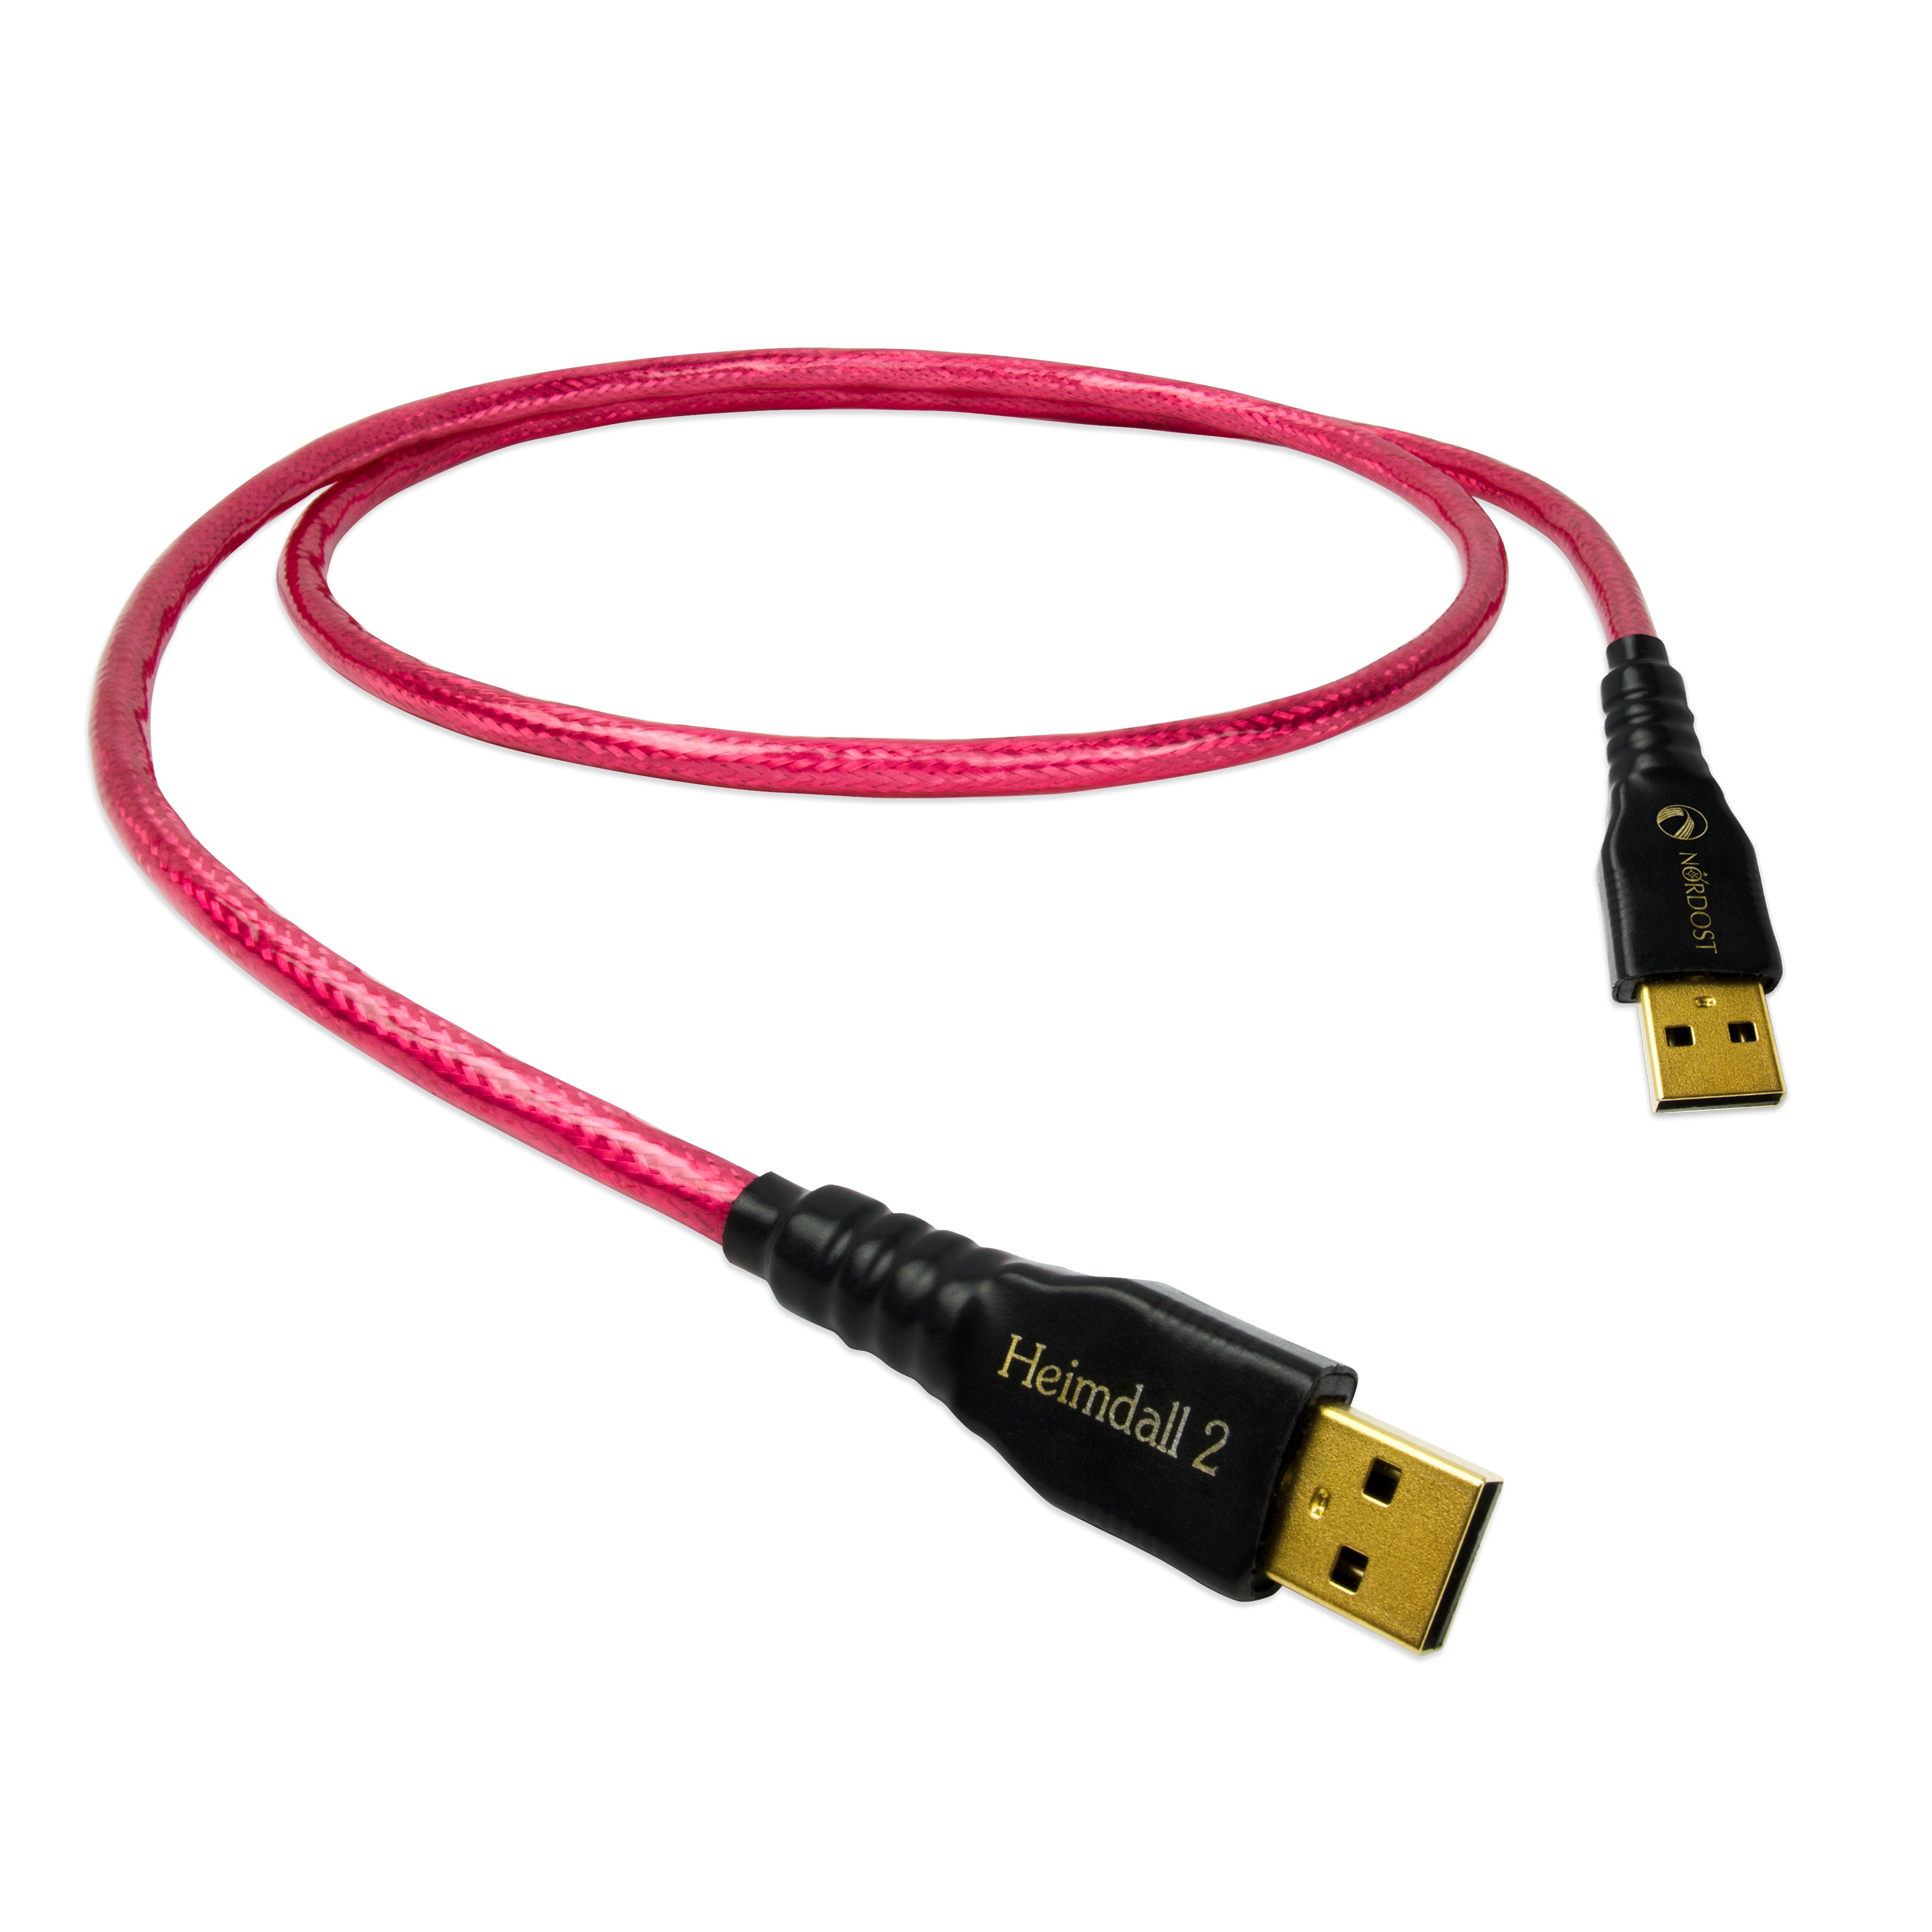 Nordost Norse Heimdall 2 USB 2.0 Cable